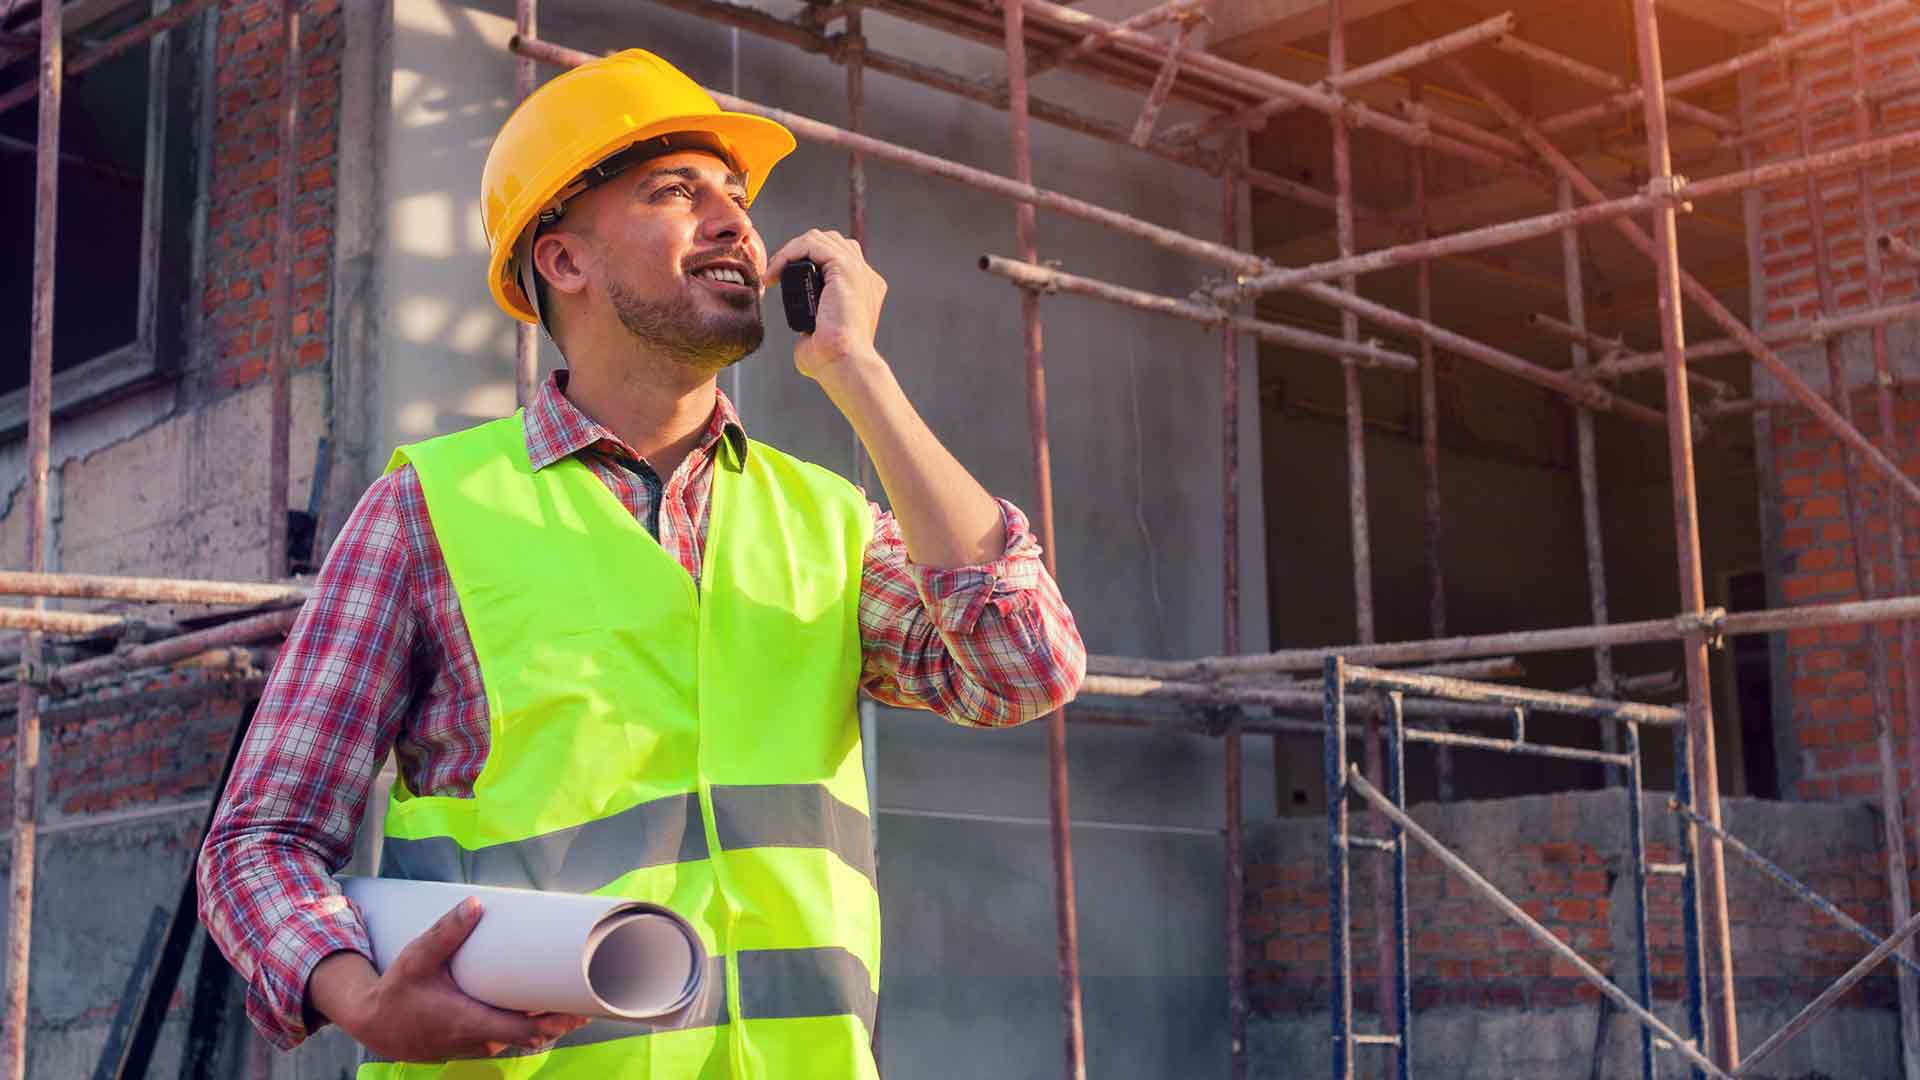 A man in a working on a construction site with a helment and high-vis jacket.